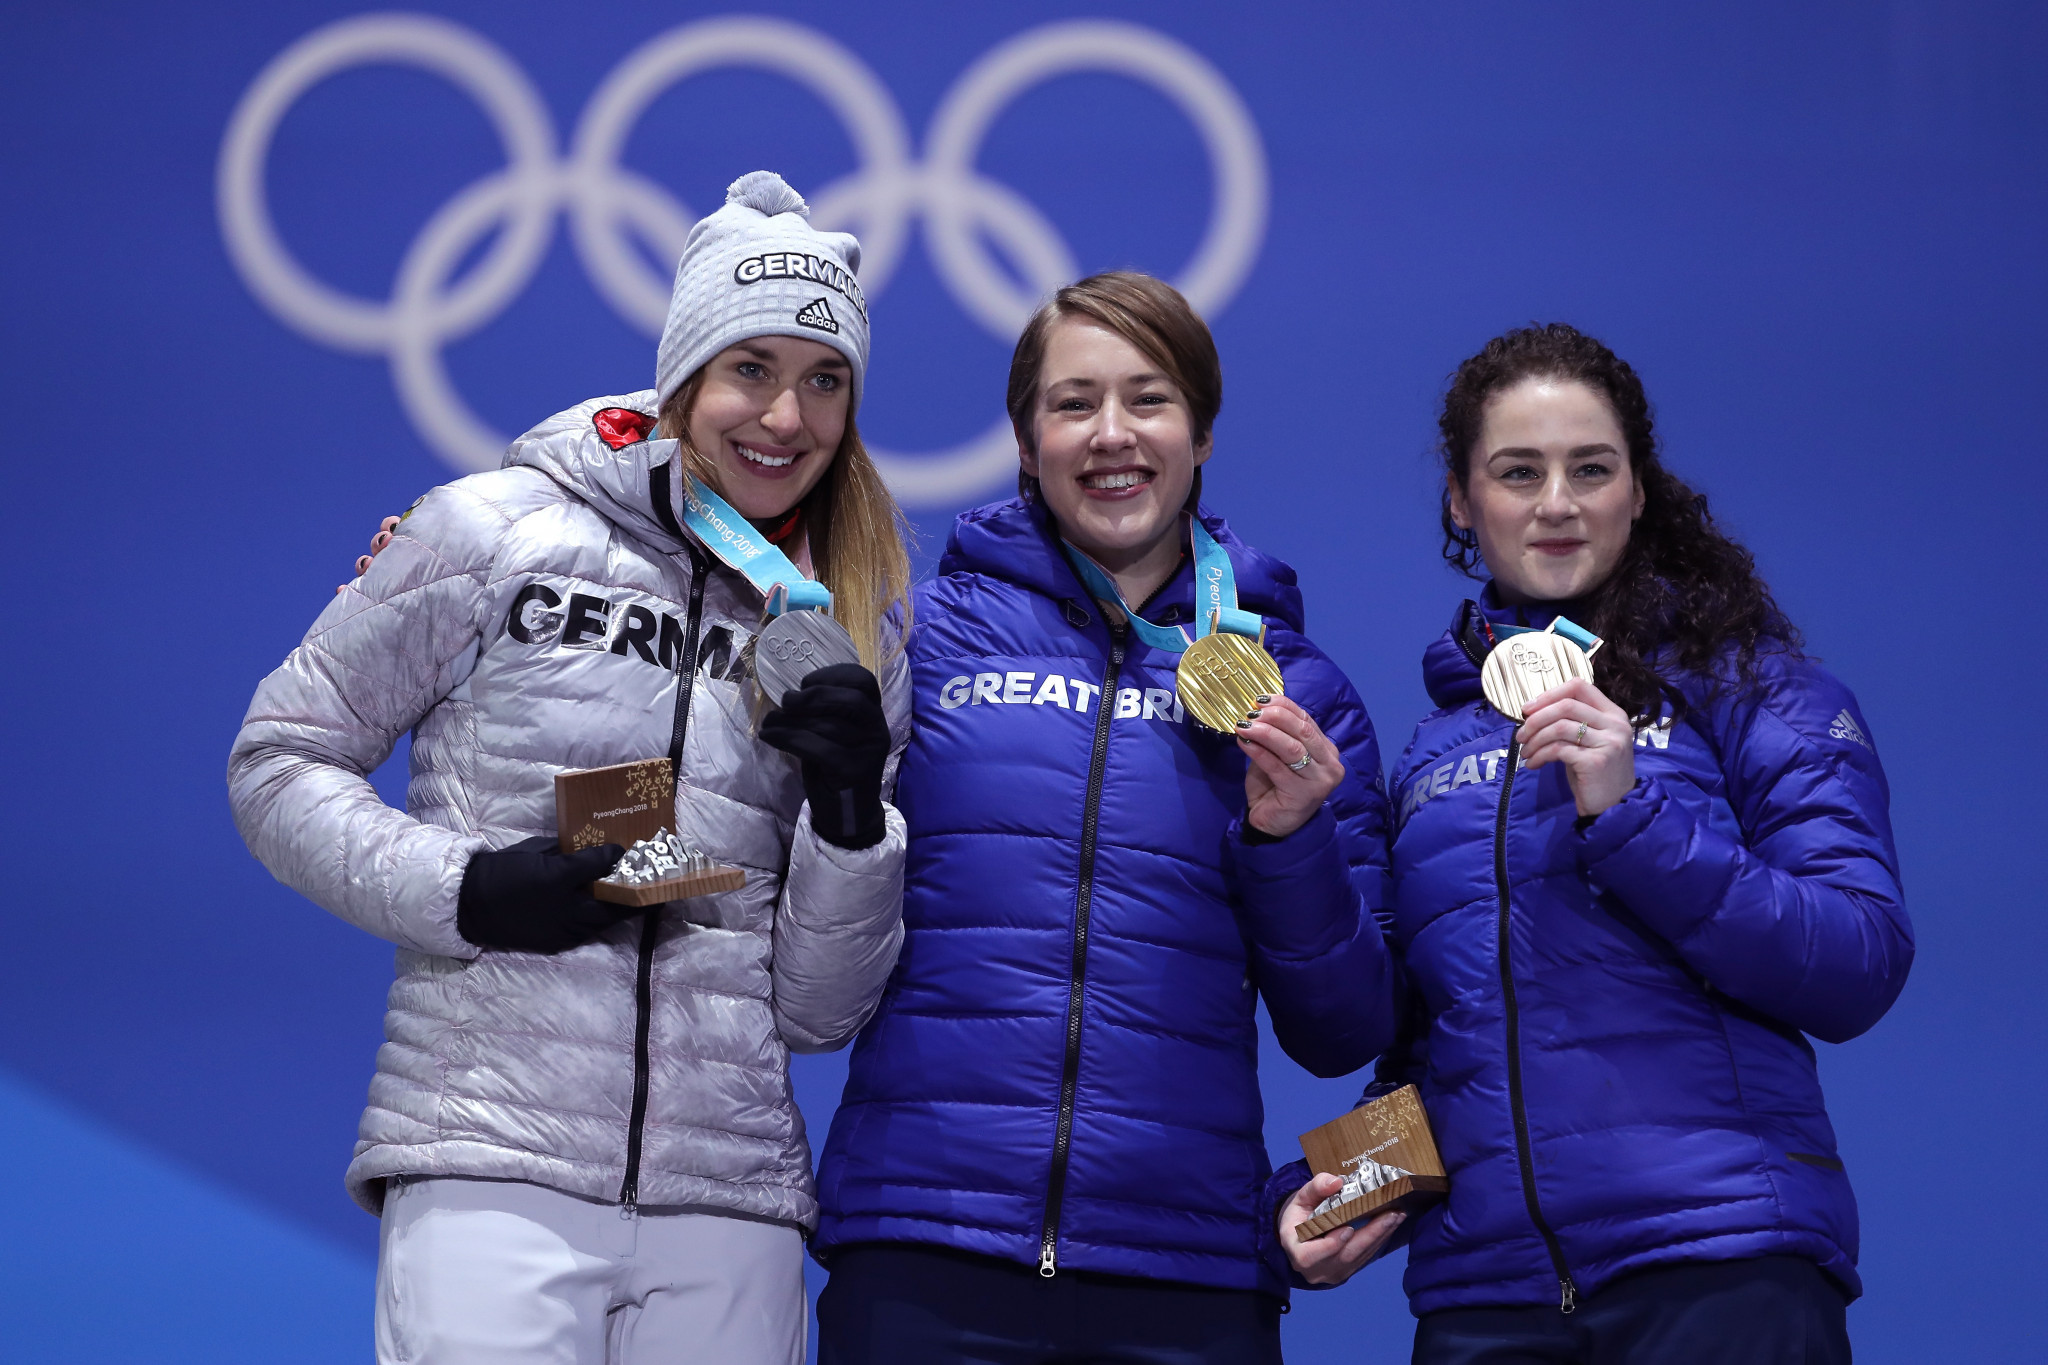 Mark Woods is credited with helping identify and develop the talent of Lizzy Yarnold, centre, and Laura Dees, right, who won gold and bronze respectively at the Pyeongchang 2018 Winter Olympics ©Getty Images